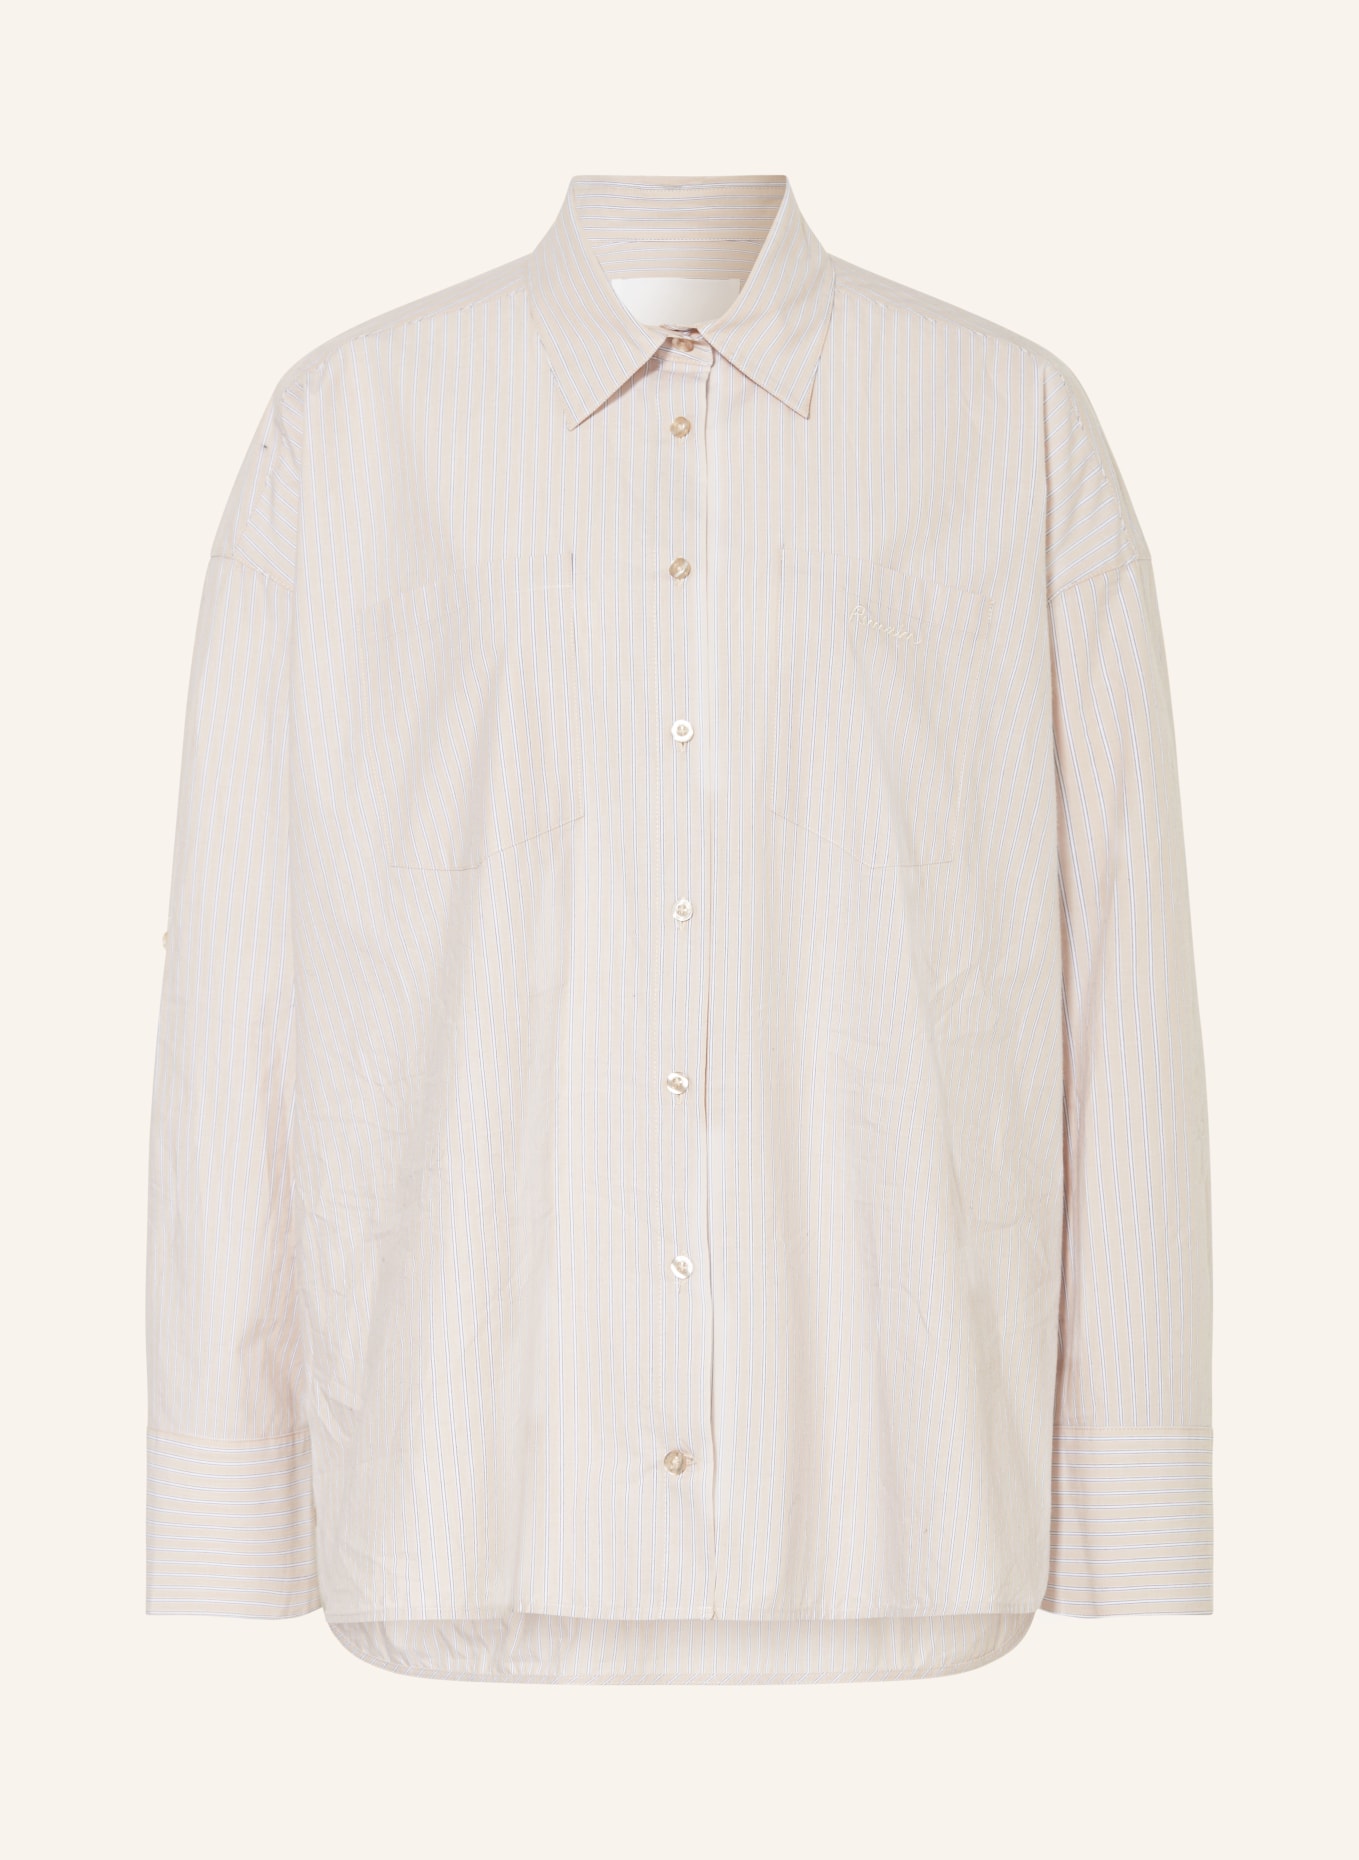 REMAIN Shirt blouse, Color: LIGHT BROWN/ WHITE/ GRAY (Image 1)